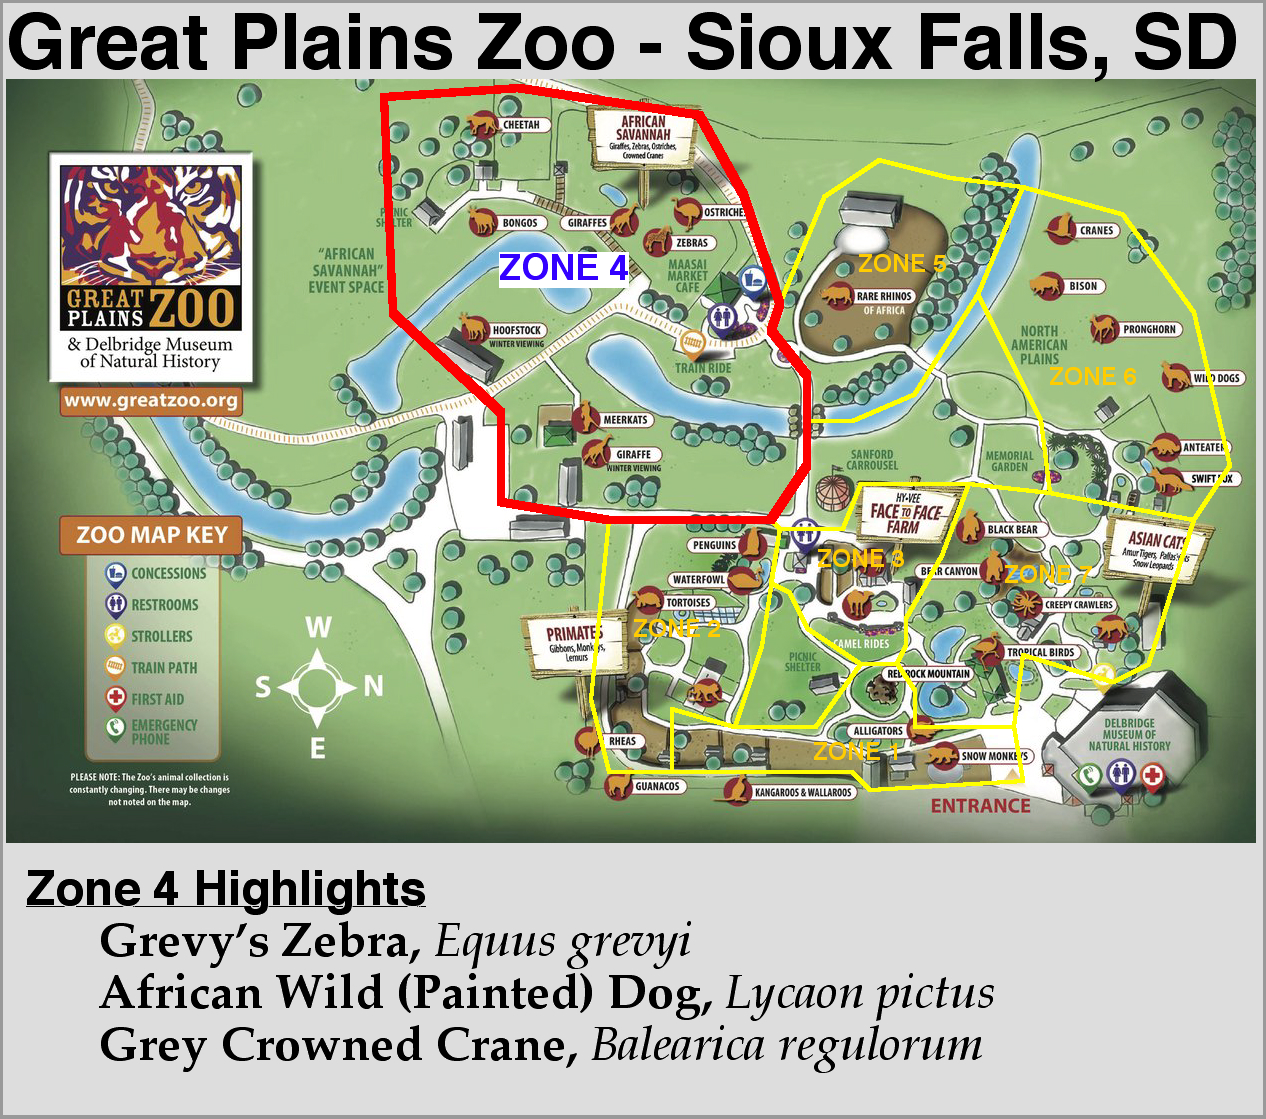 Summer Vacation Redux #9: Sioux Falls: The Great Plains Zoo, part 4 of 7.